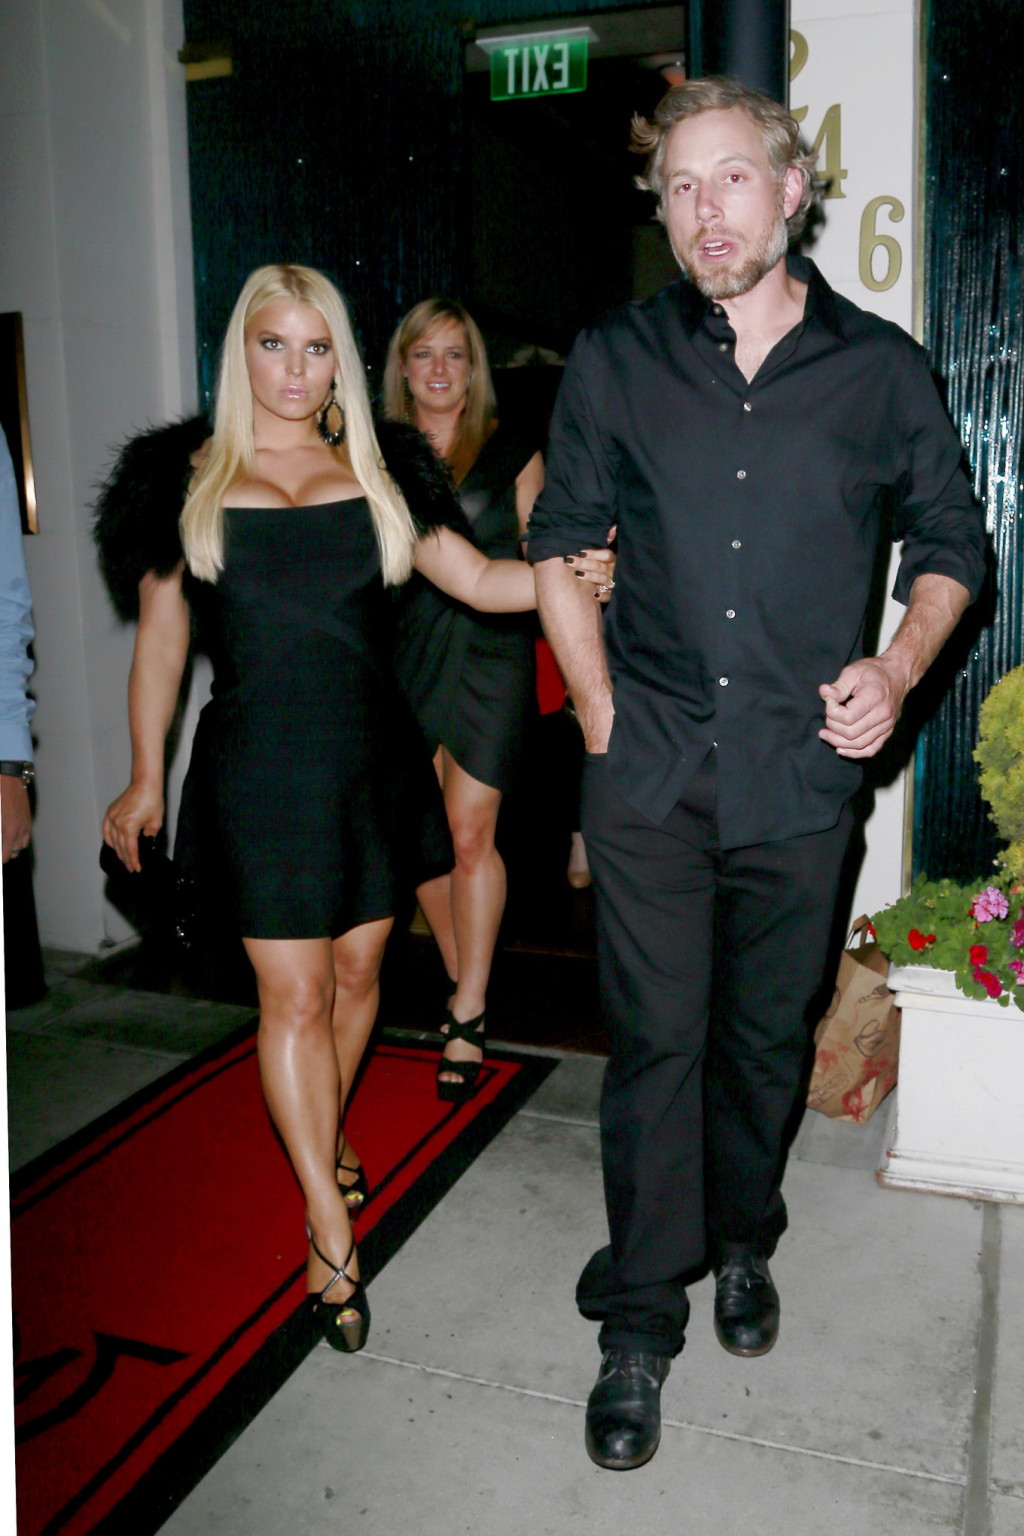 Jessica Simpson busty wearing a black low cut dress at Mastro's Steakhouse in LA #75213915